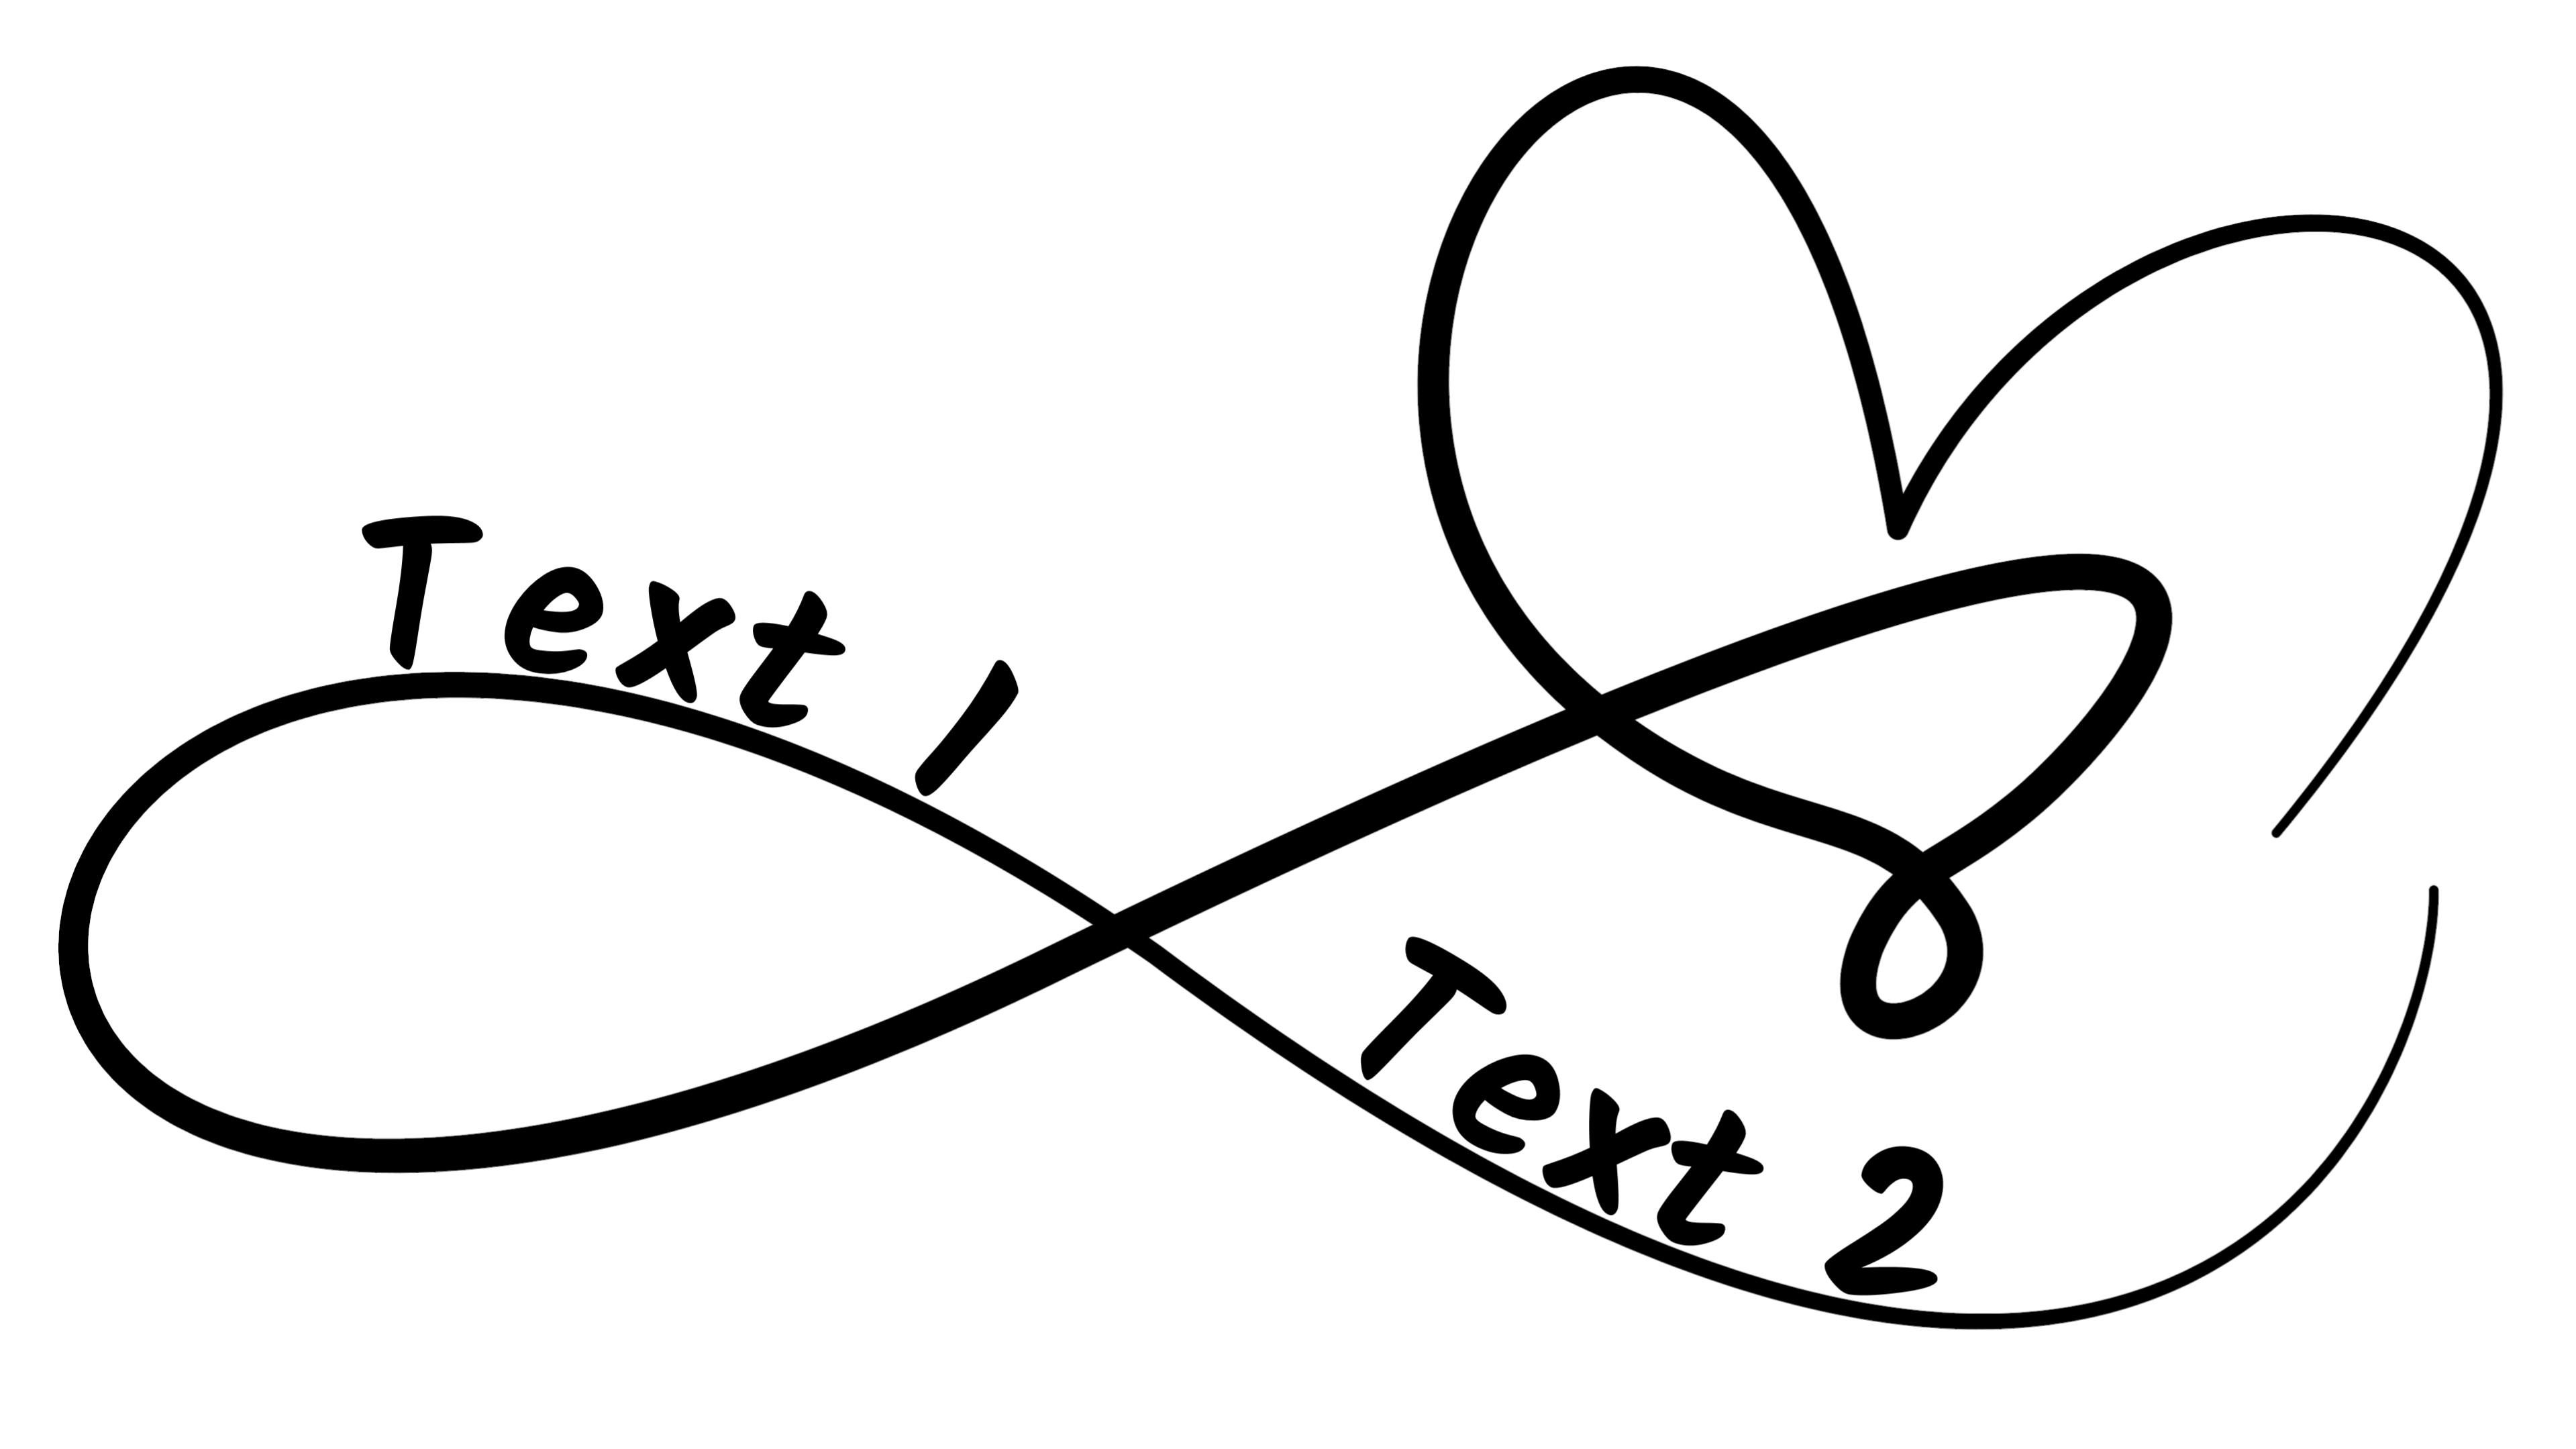 Infinity 83: Infinity Symbol Image with personal text